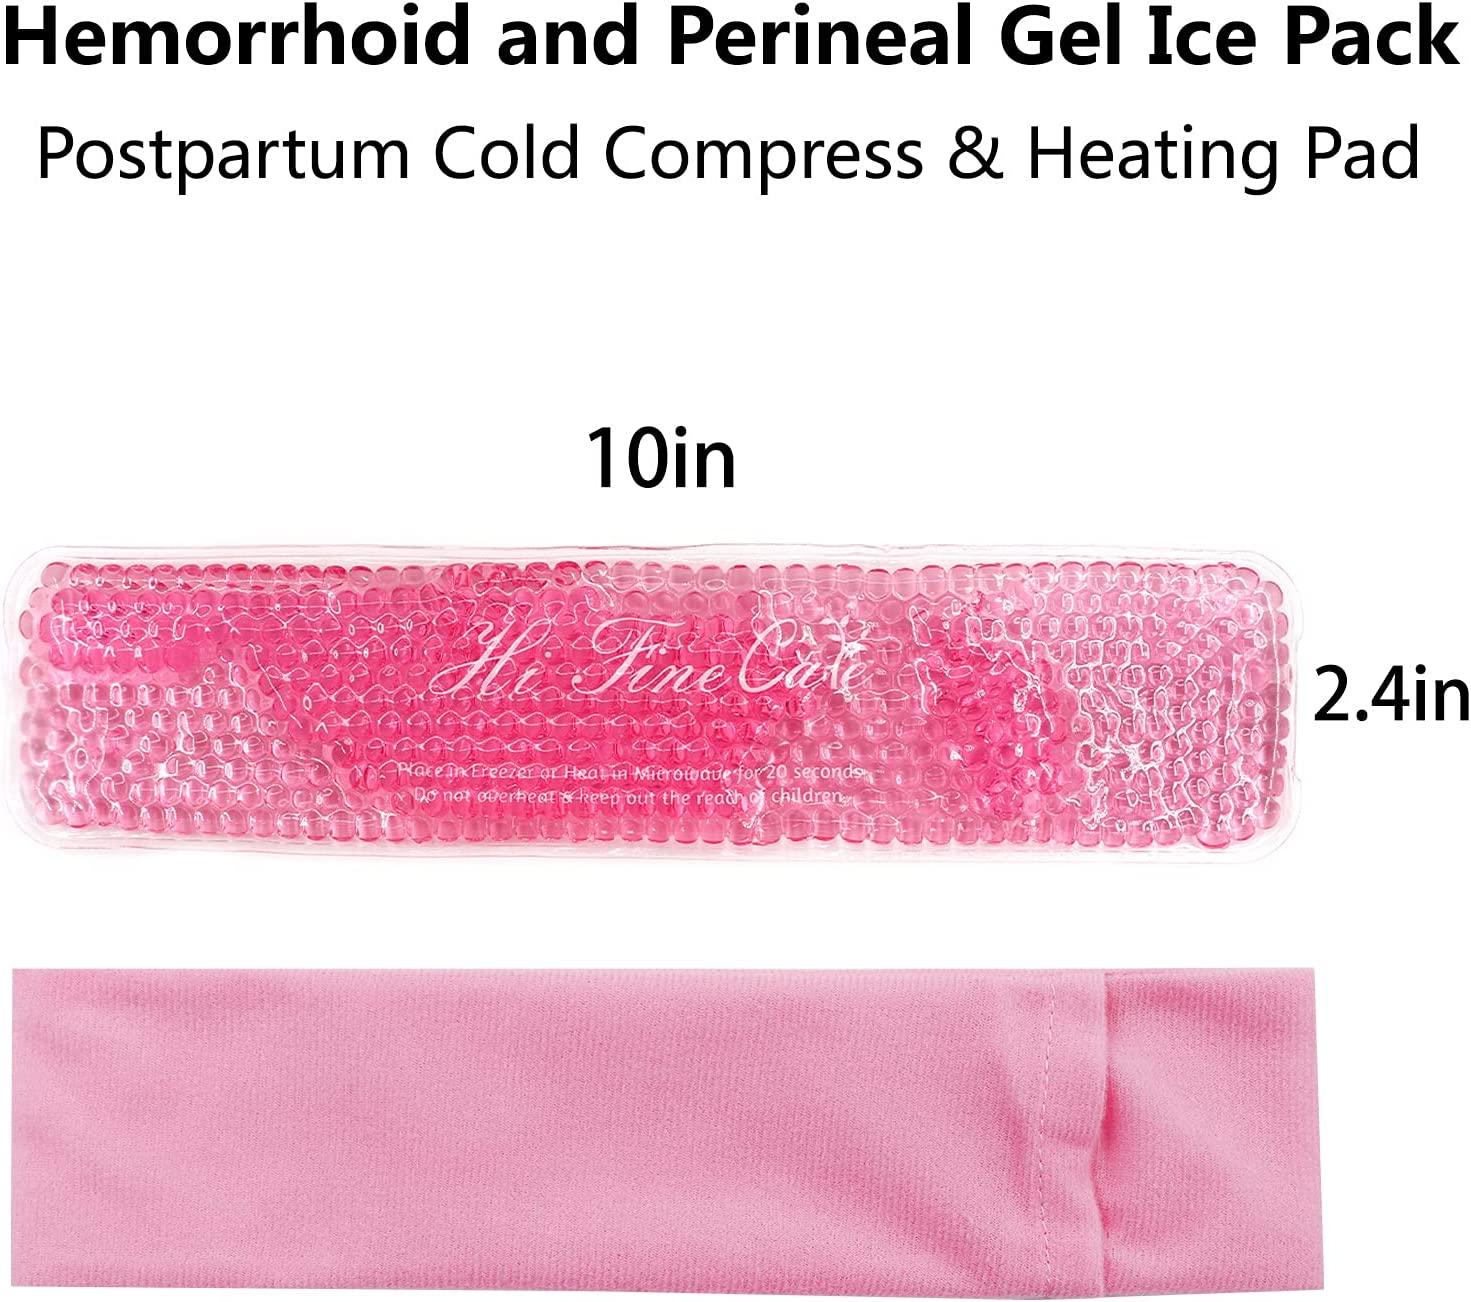 Reusable Perineal Cooling Pad, Perineal Cold Packs, Postpartum and